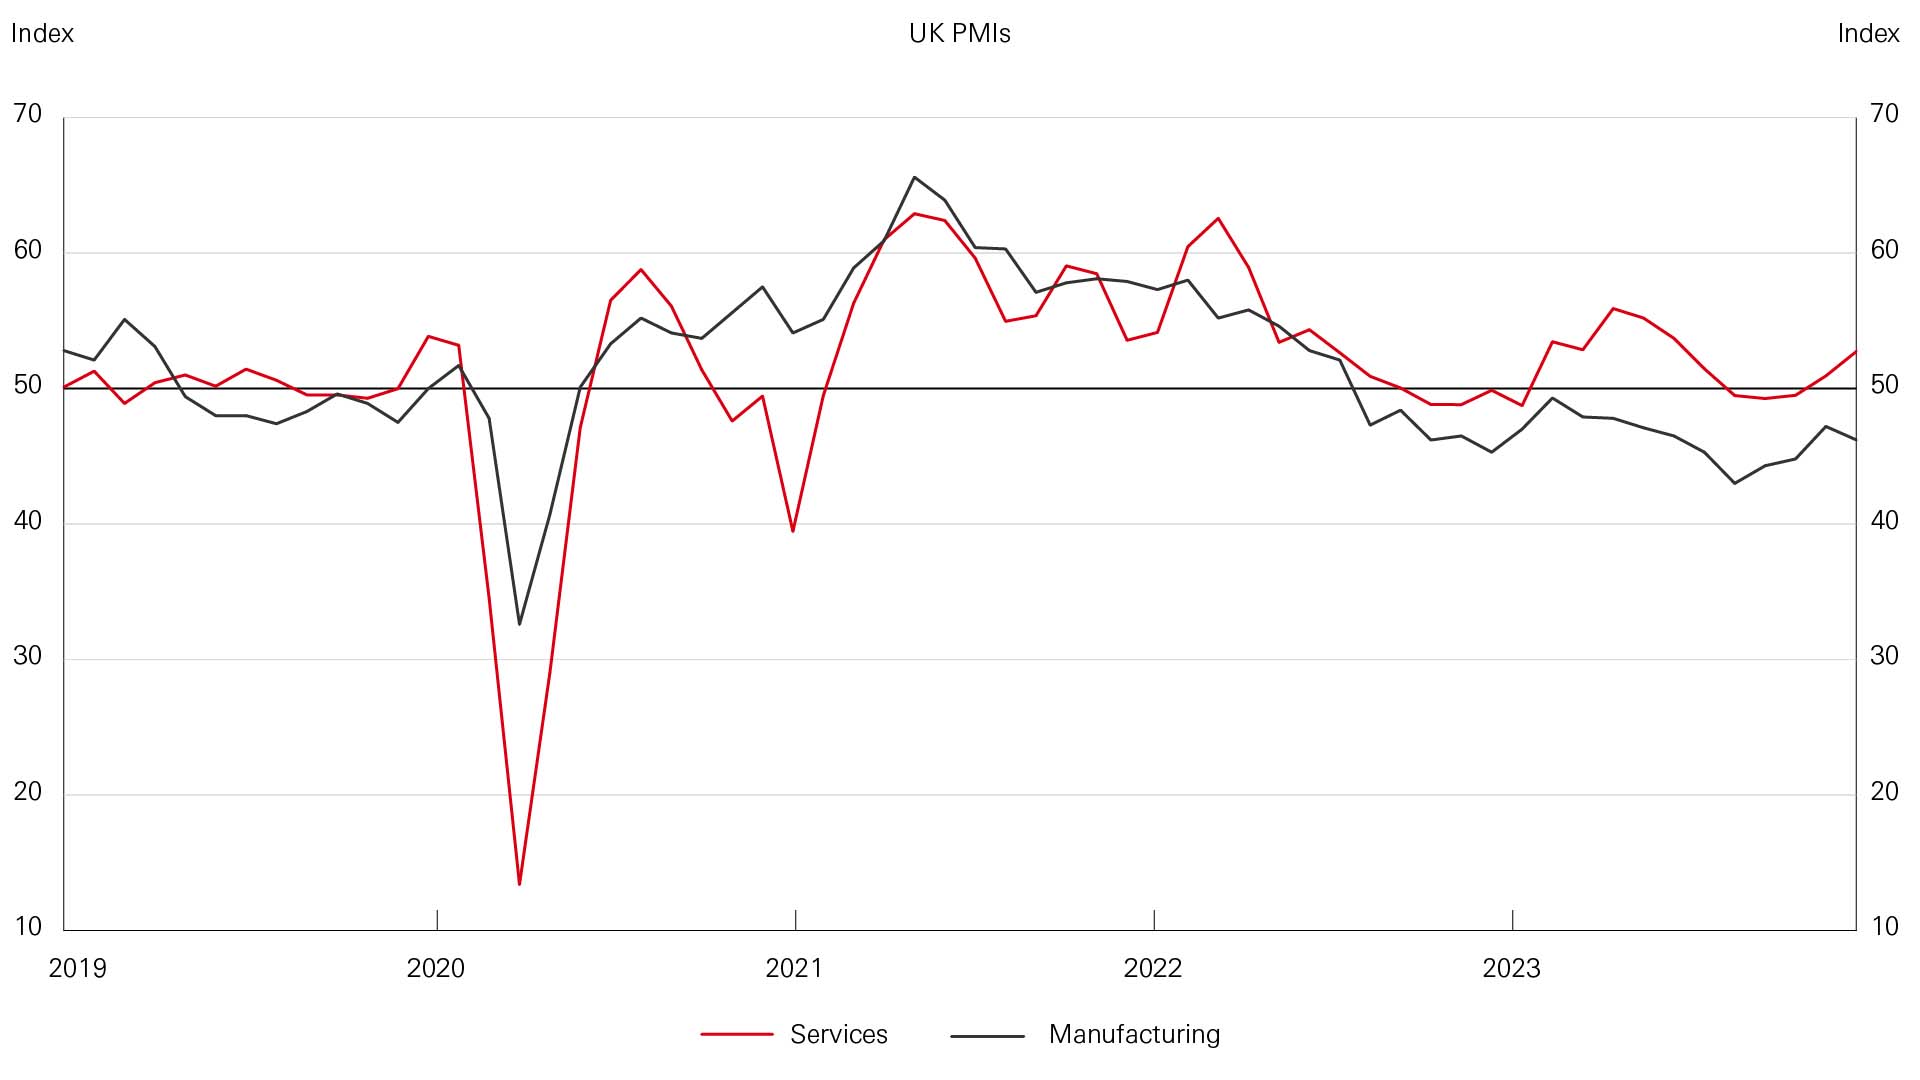 Graph showing UK PMIs for Manufacturing and Services